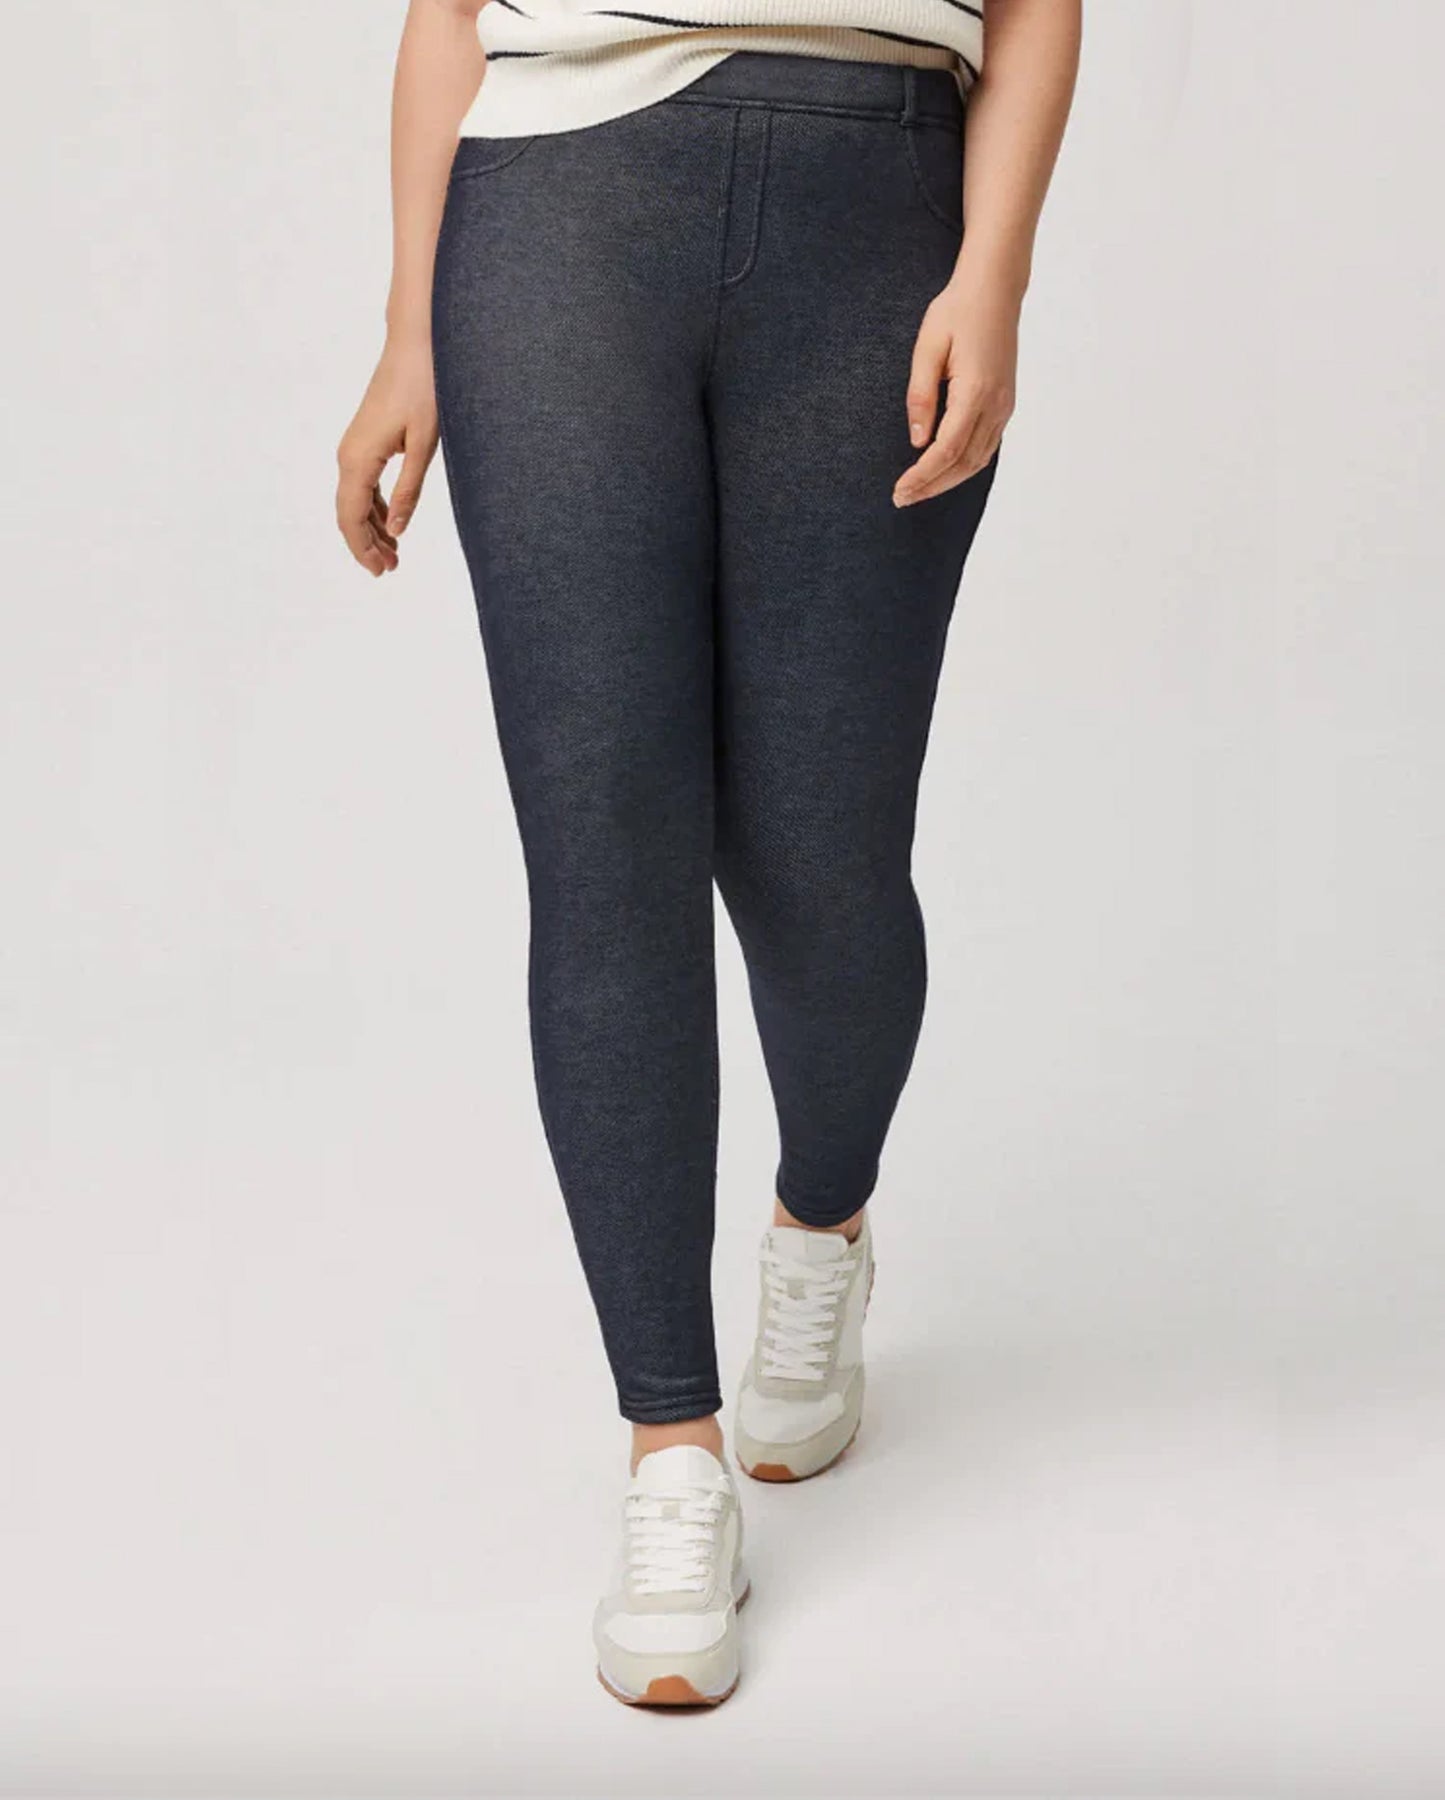 Ysabel Mora 70176 Thermal Jeggings - Mid rise dark denim jean leggings (jeggings) with a light fleck throughout, thick grey fluffy fleece lining, belt loops, faux fly zip stitching and rear pockets.